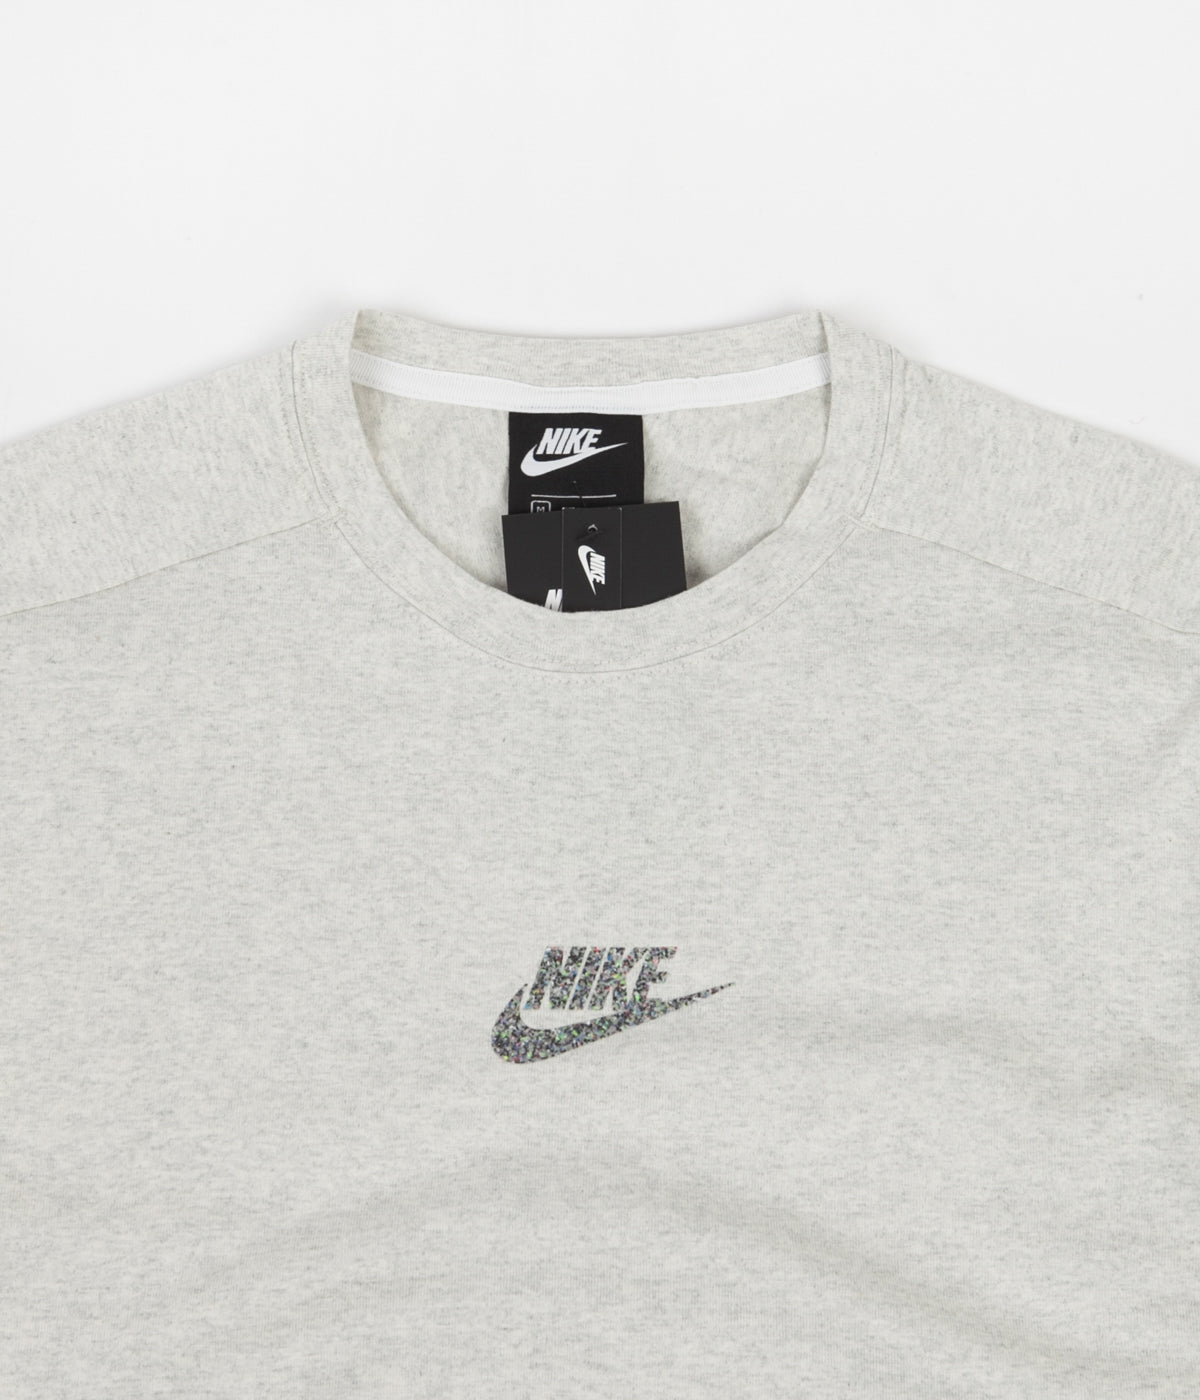 Nike Revival Jersey T-Shirt - White / Heather | Always in Colour